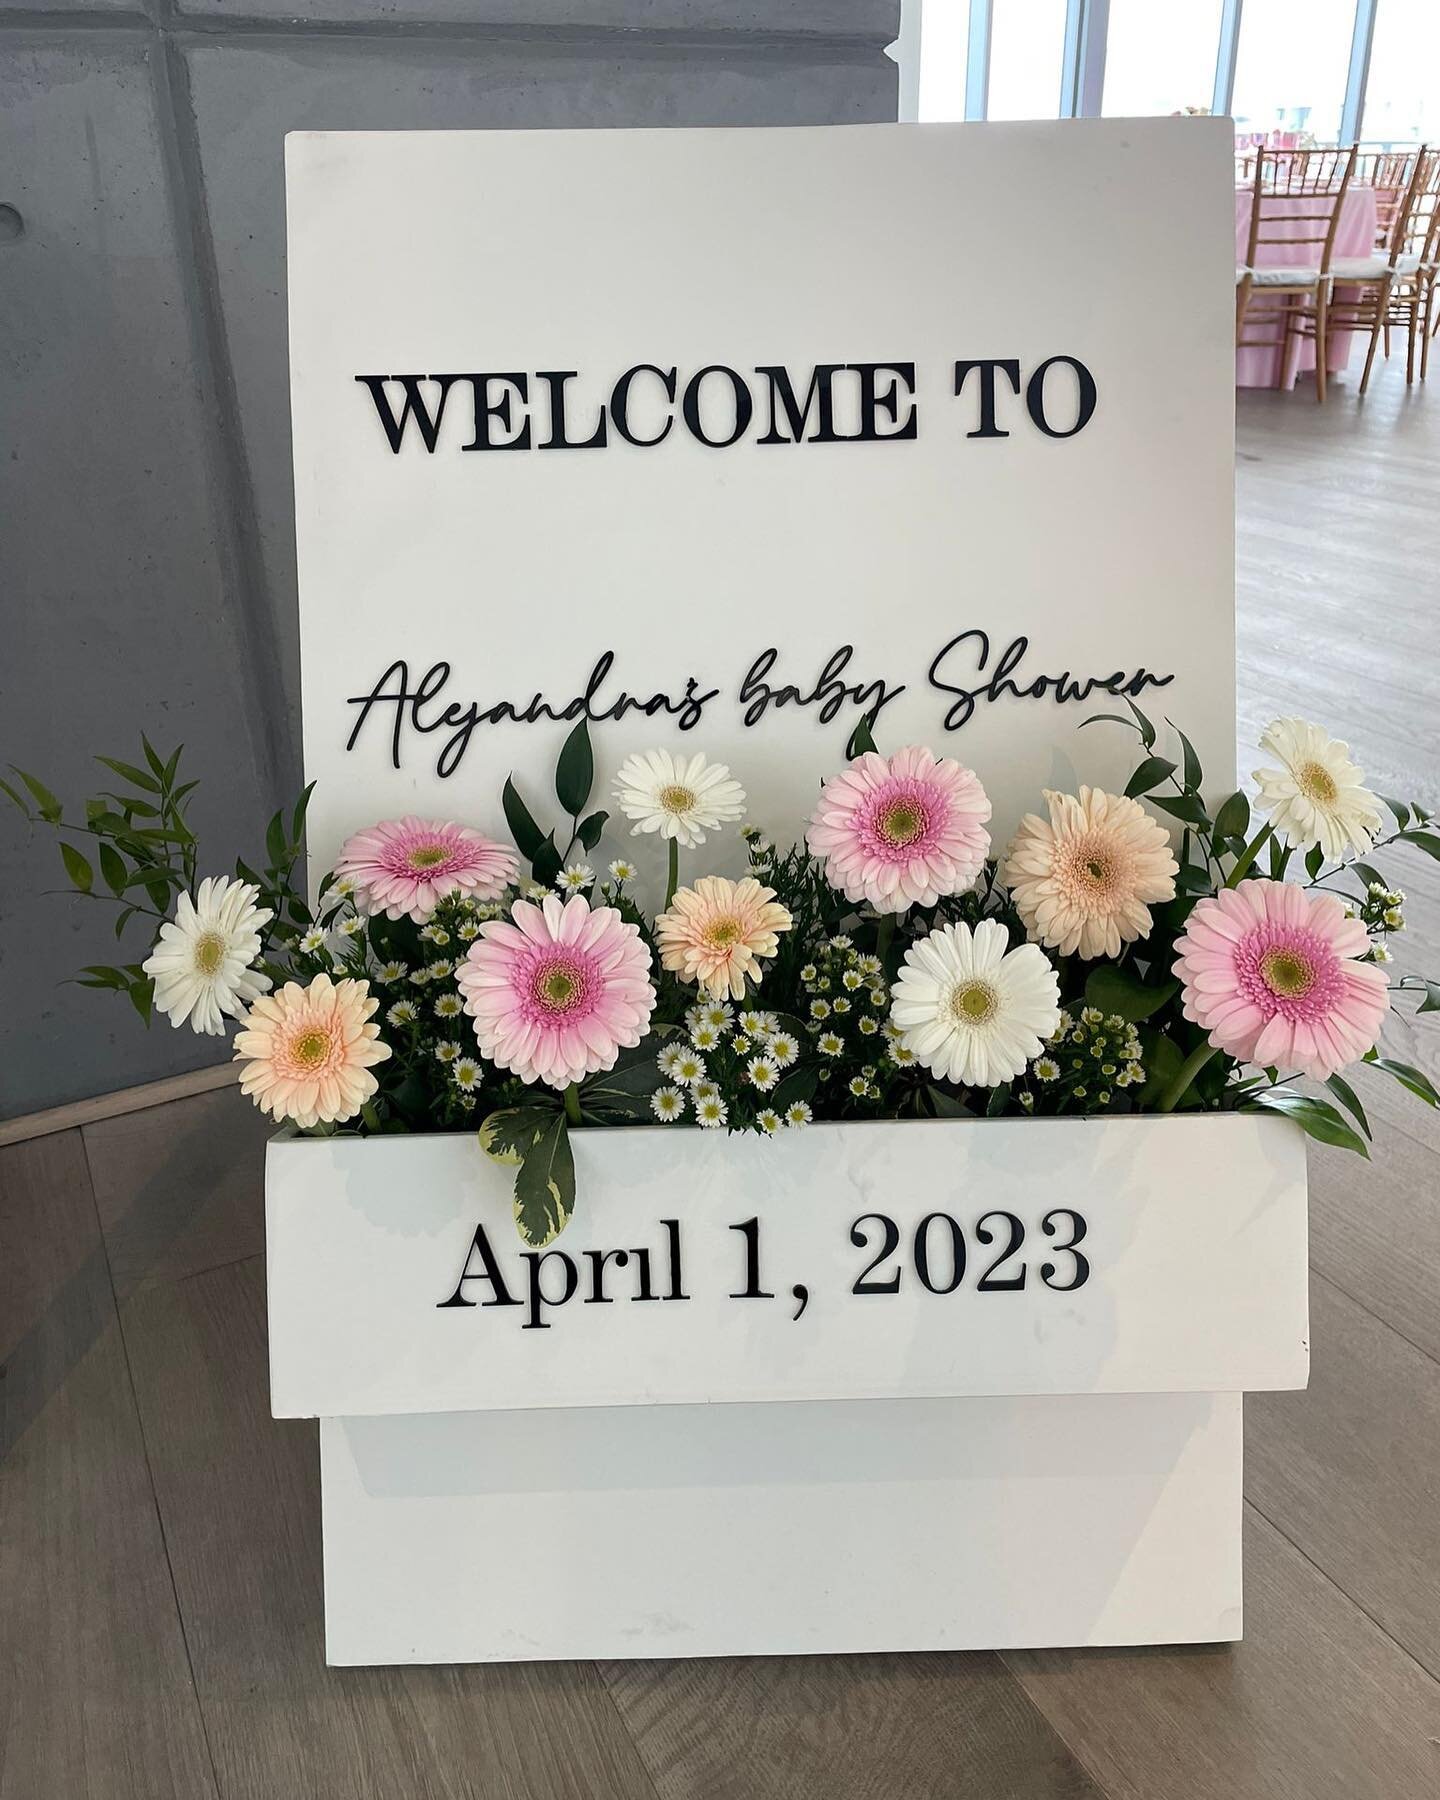 Natural florals for your welcome sign &amp; on your backdrop &gt; swipe for full event. 
.
.
.
.
.
.
.
#welcomesign #babyshowerideas #bridalshowerideas #bridal #miamiflorist #miamievents #miamieventplanners #miamieventos #miamilife #miamibeach #miami